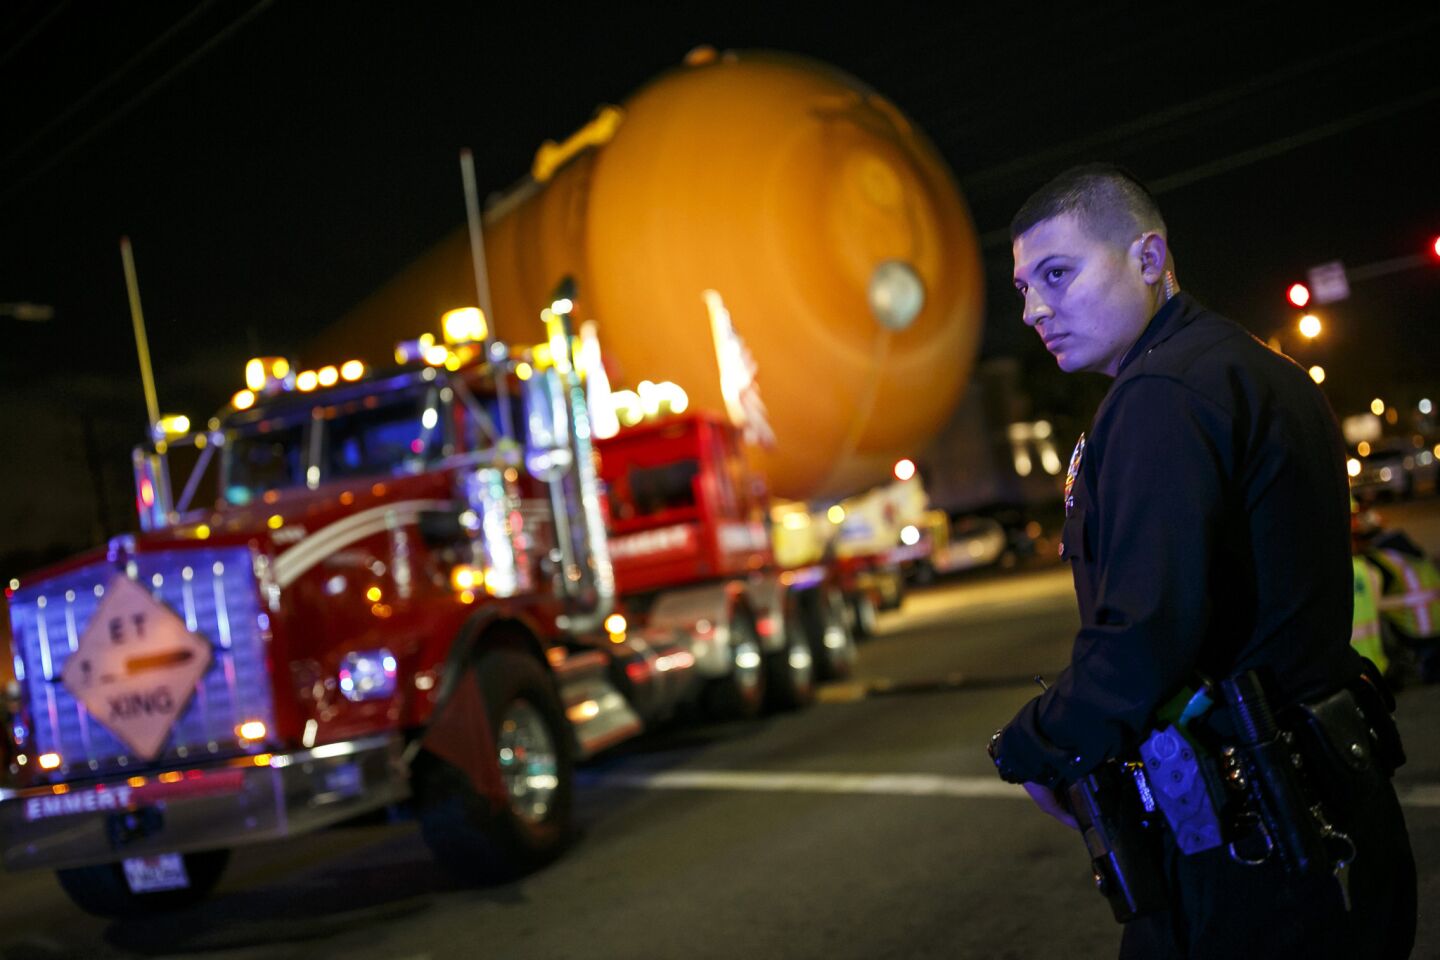 Police stand by as shuttle fuel tank ET-94 makes a turn onto Mindanao Way on its slow journey to Exposition Park.